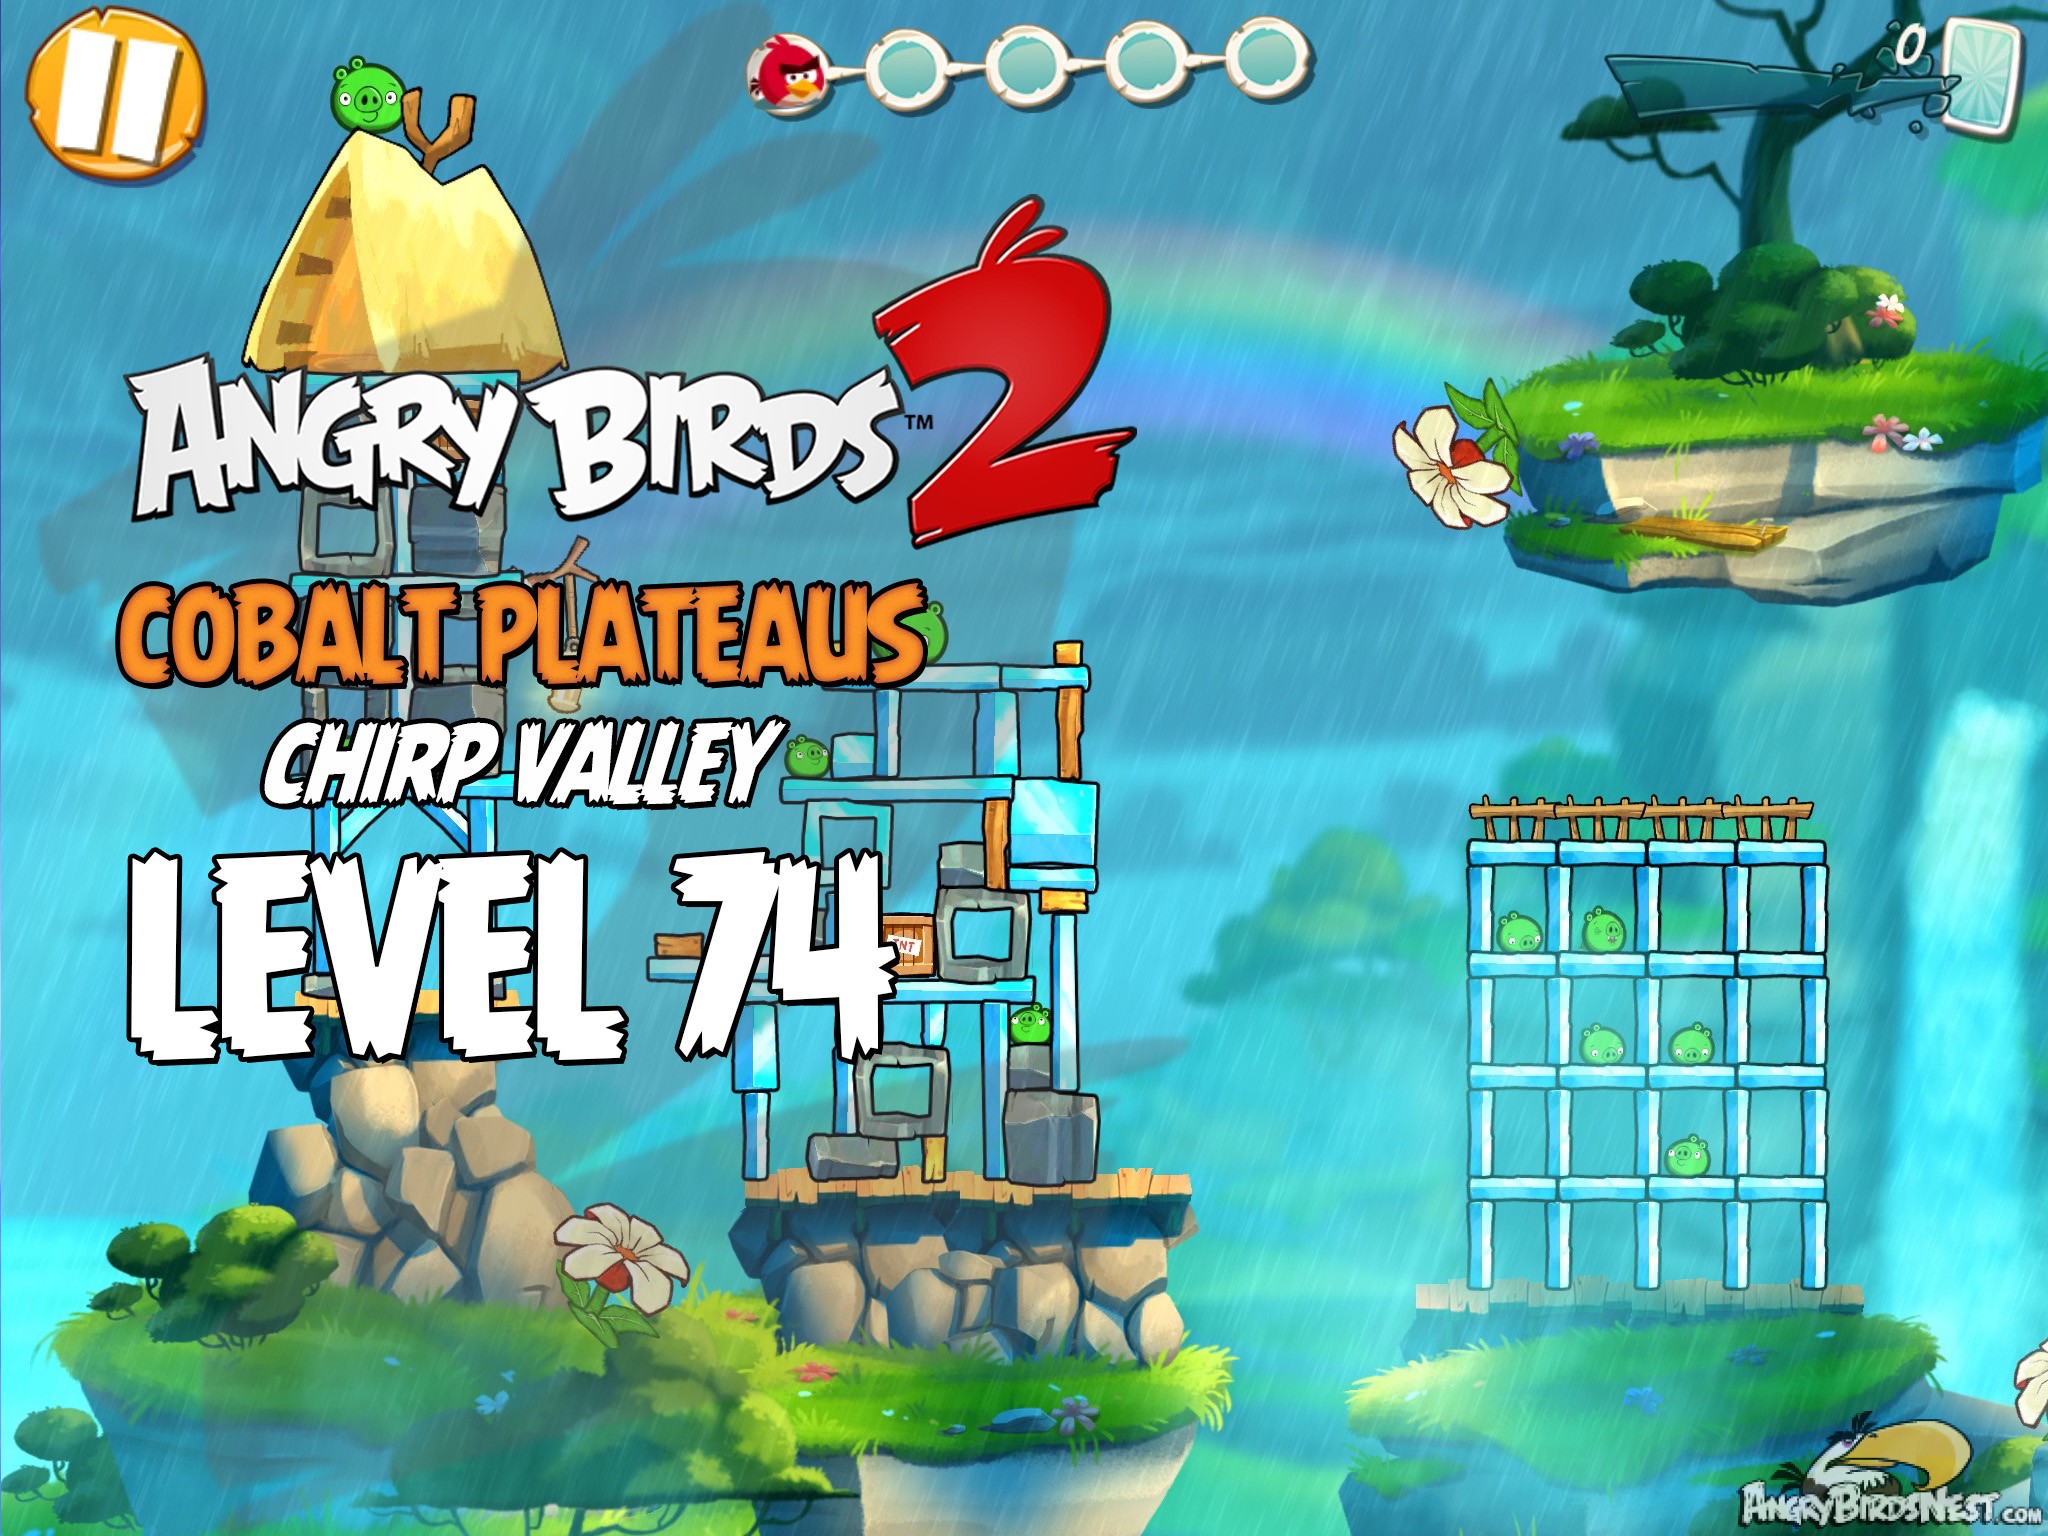 Angry Birds 2 Cobalt Plateaus Chirp Valley Level 74